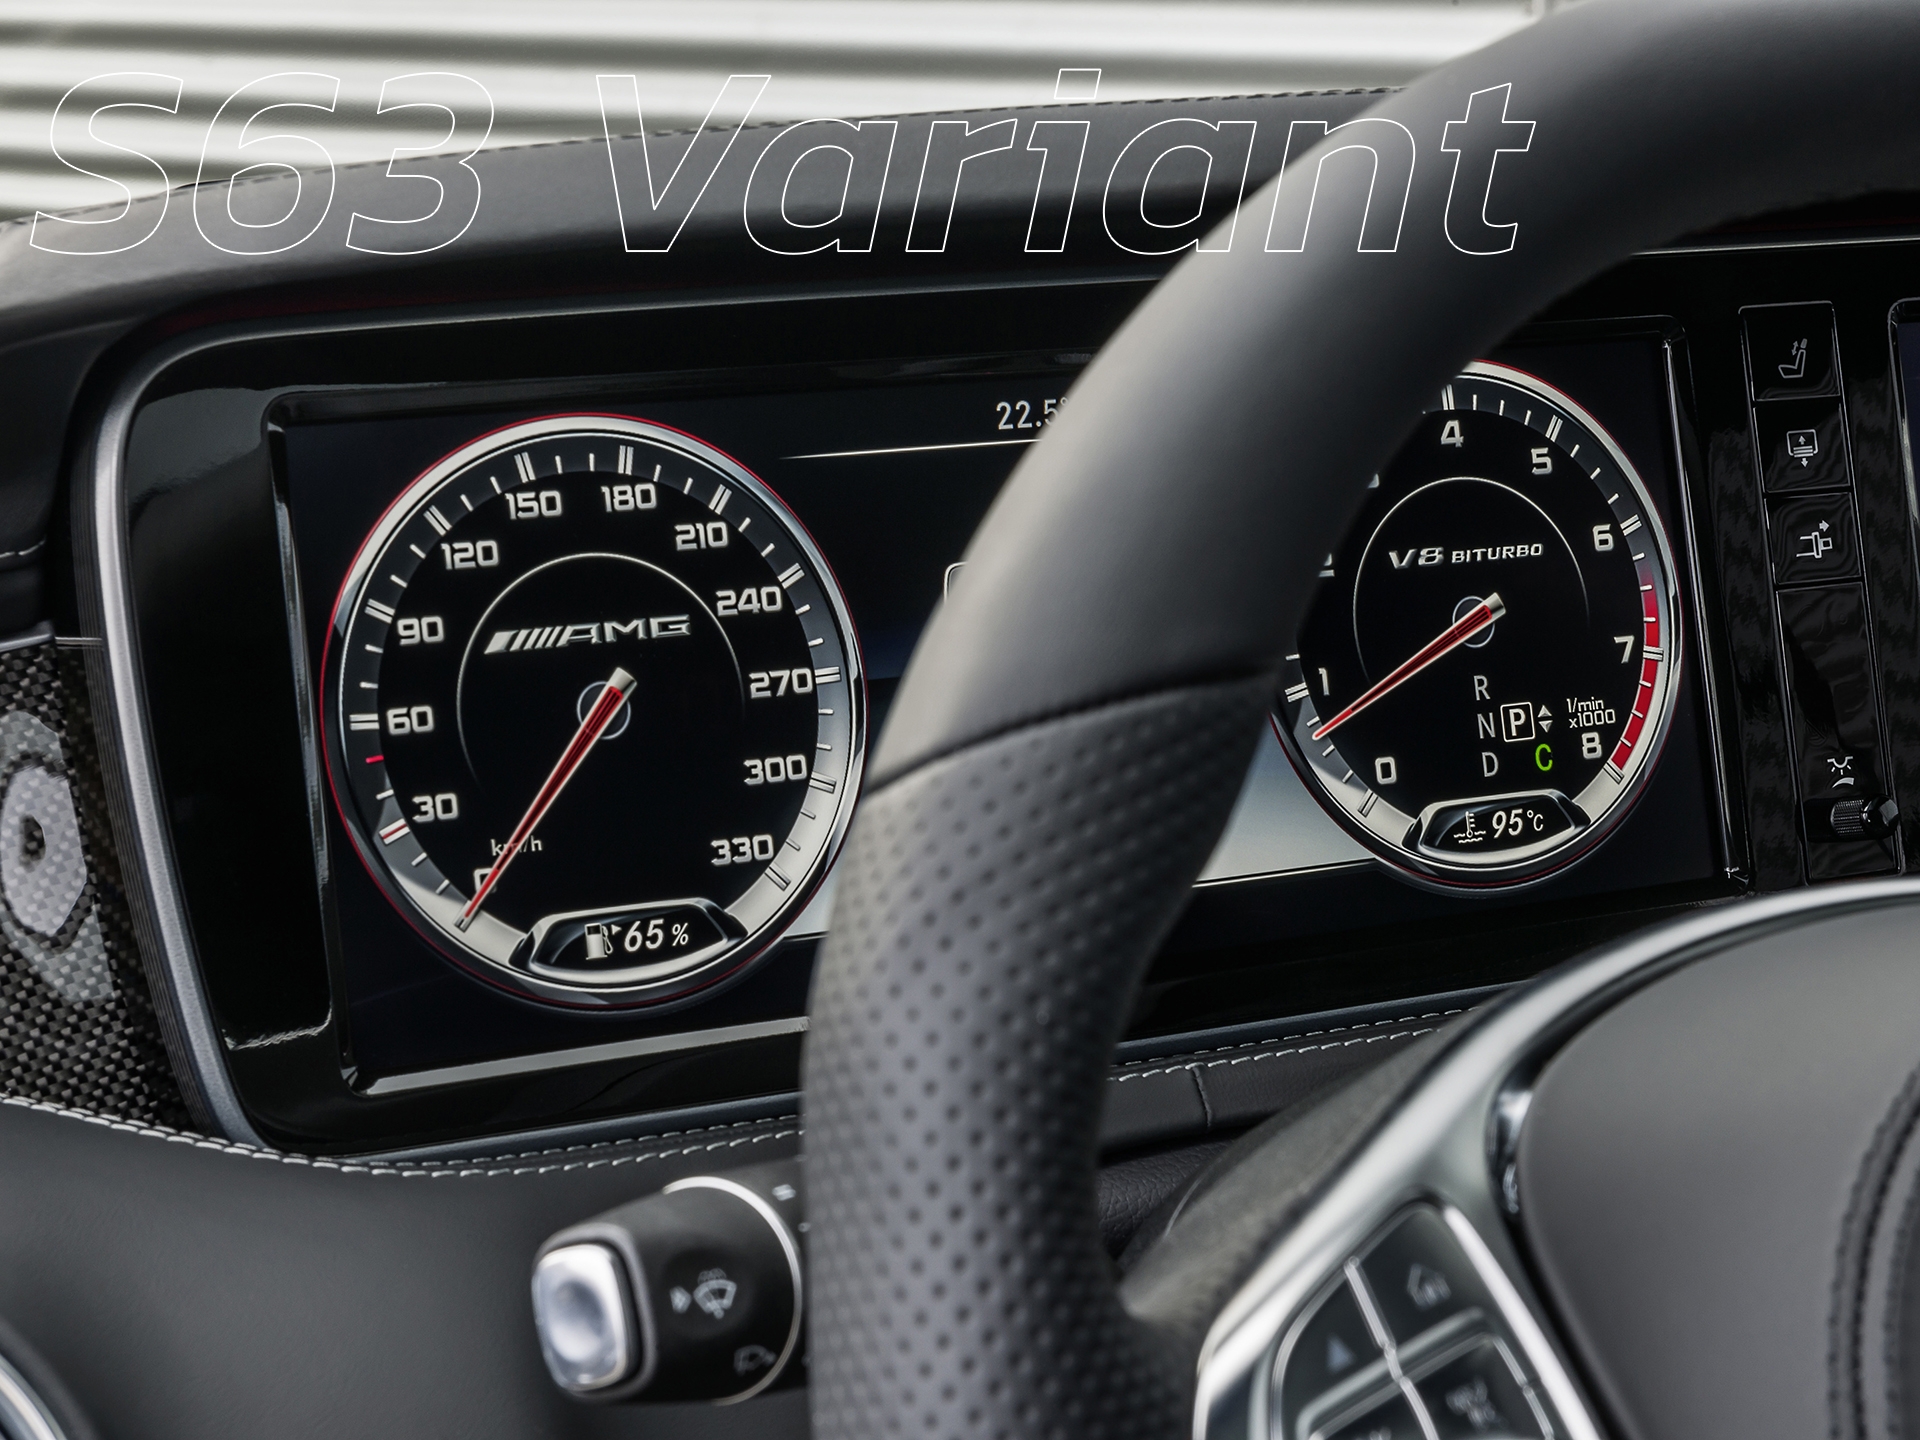 Mercedes AMG Theme for a Digital Instrument Cluster